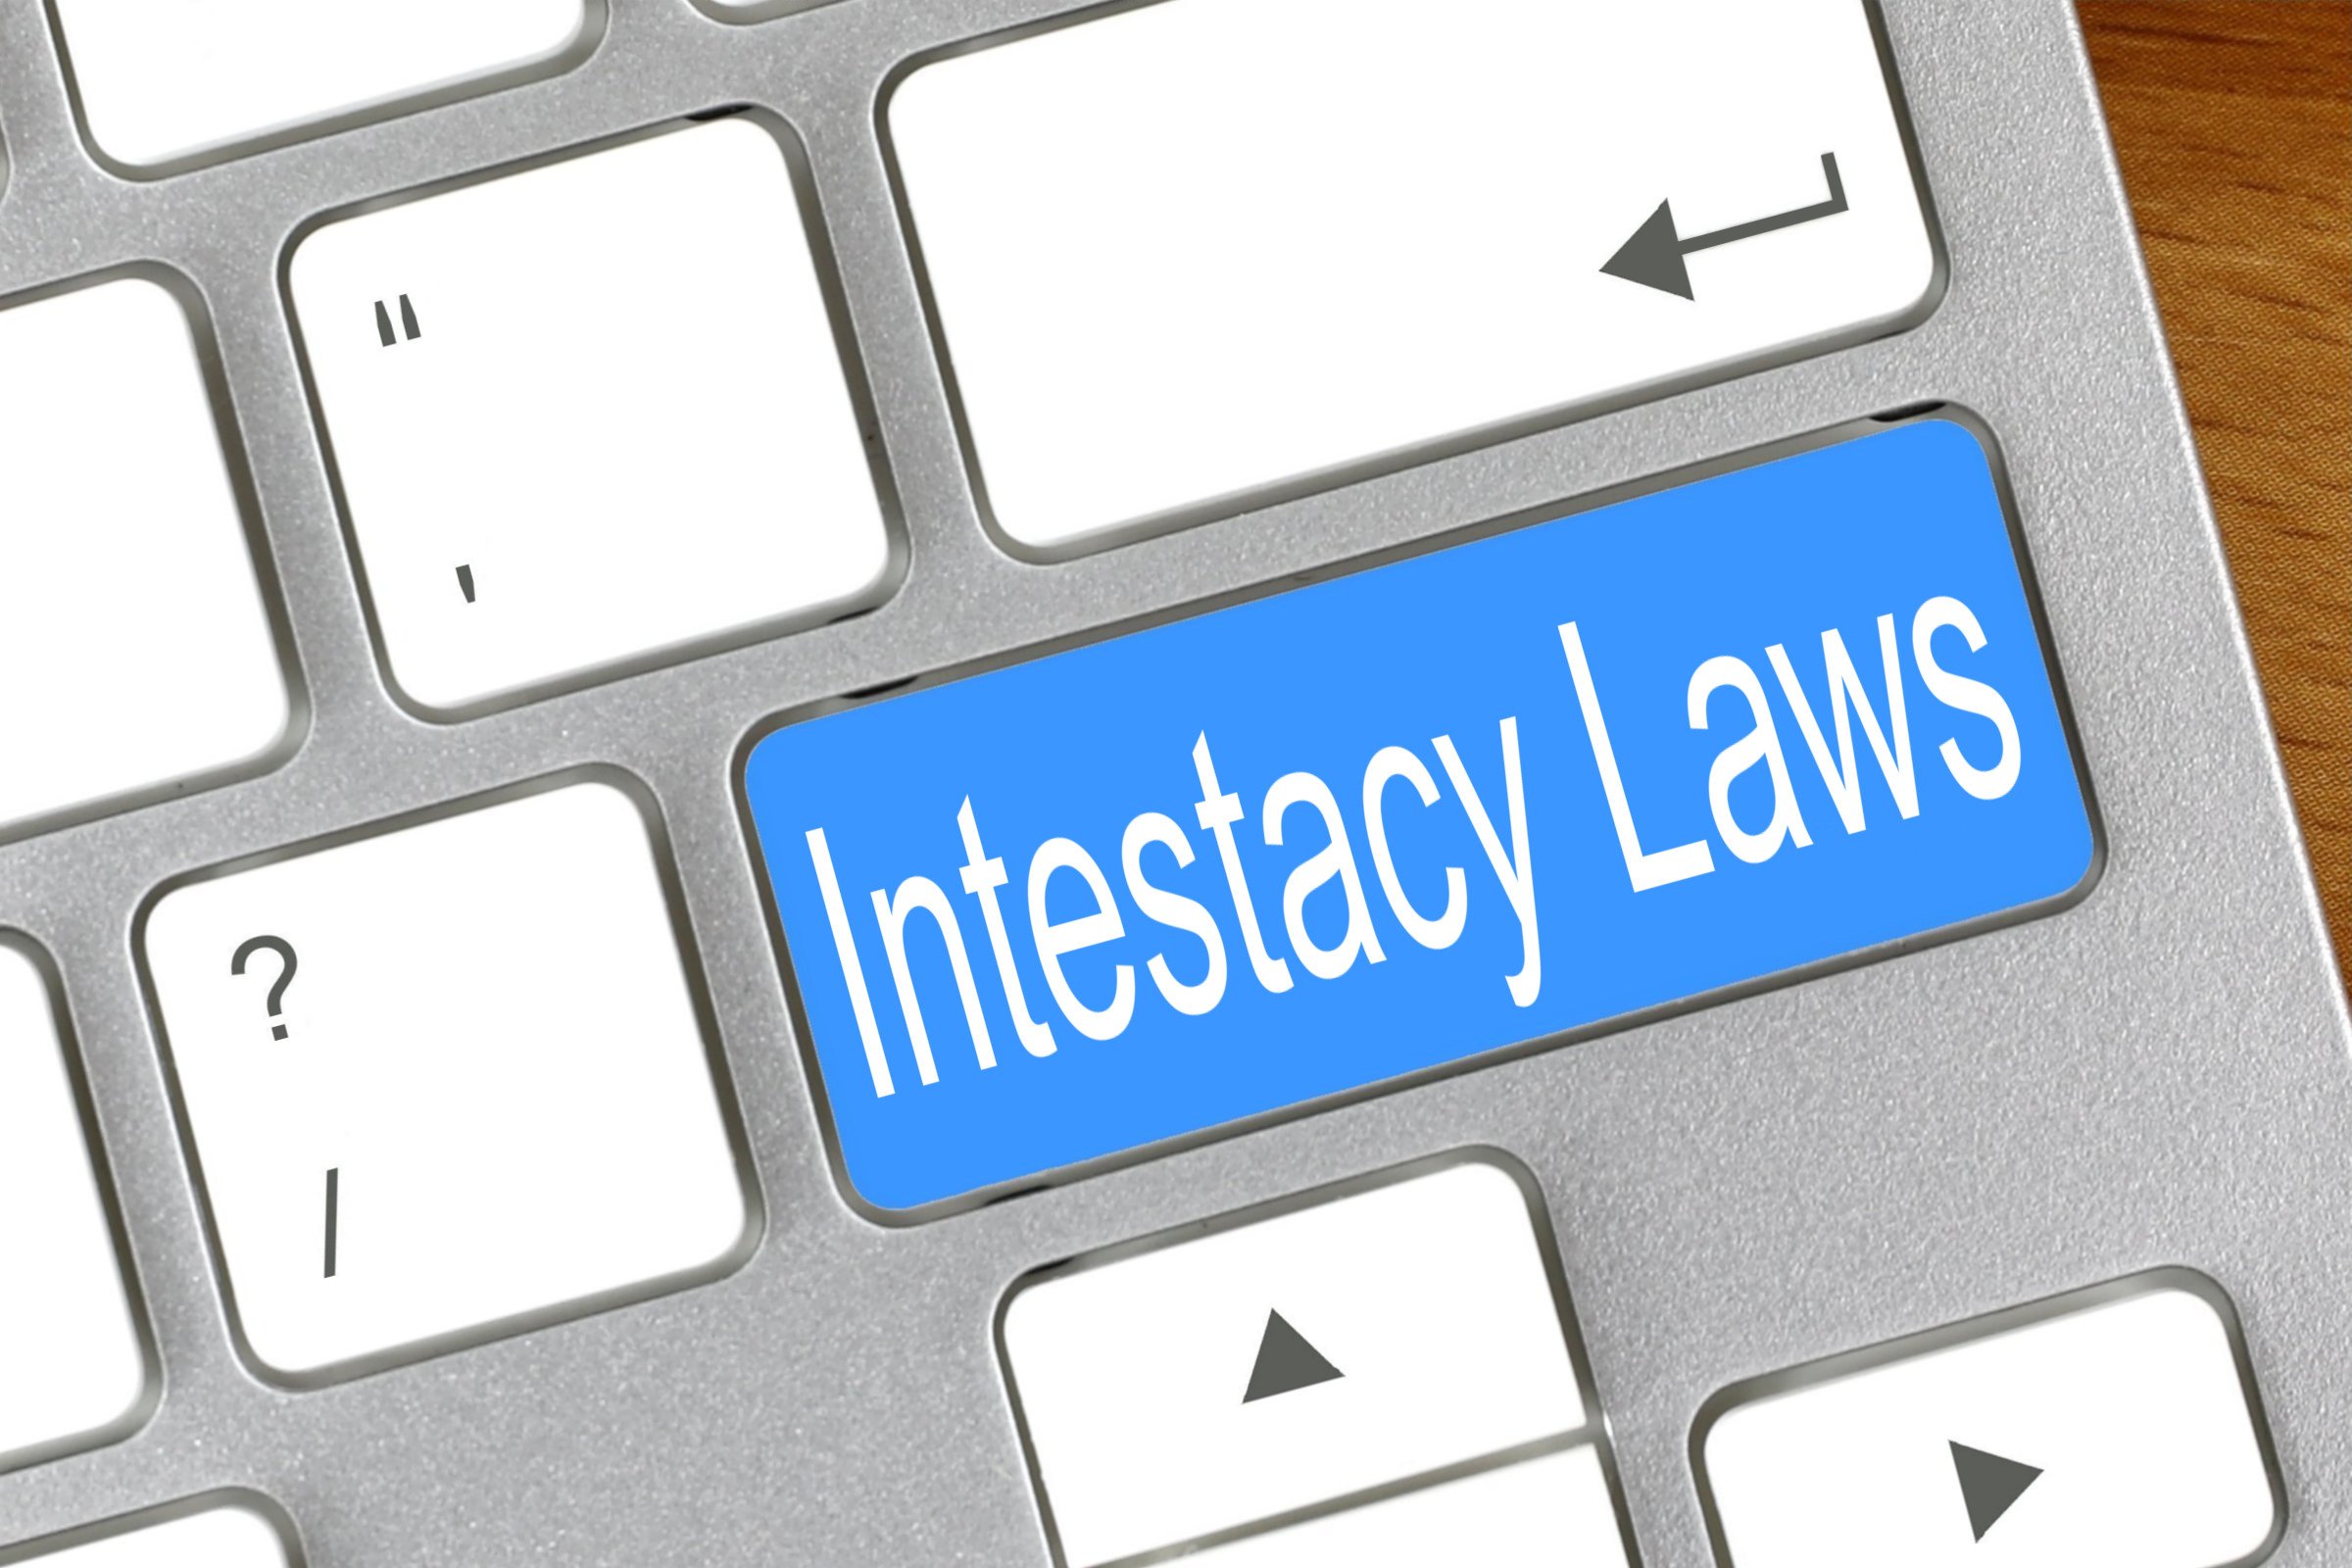 intestacy laws